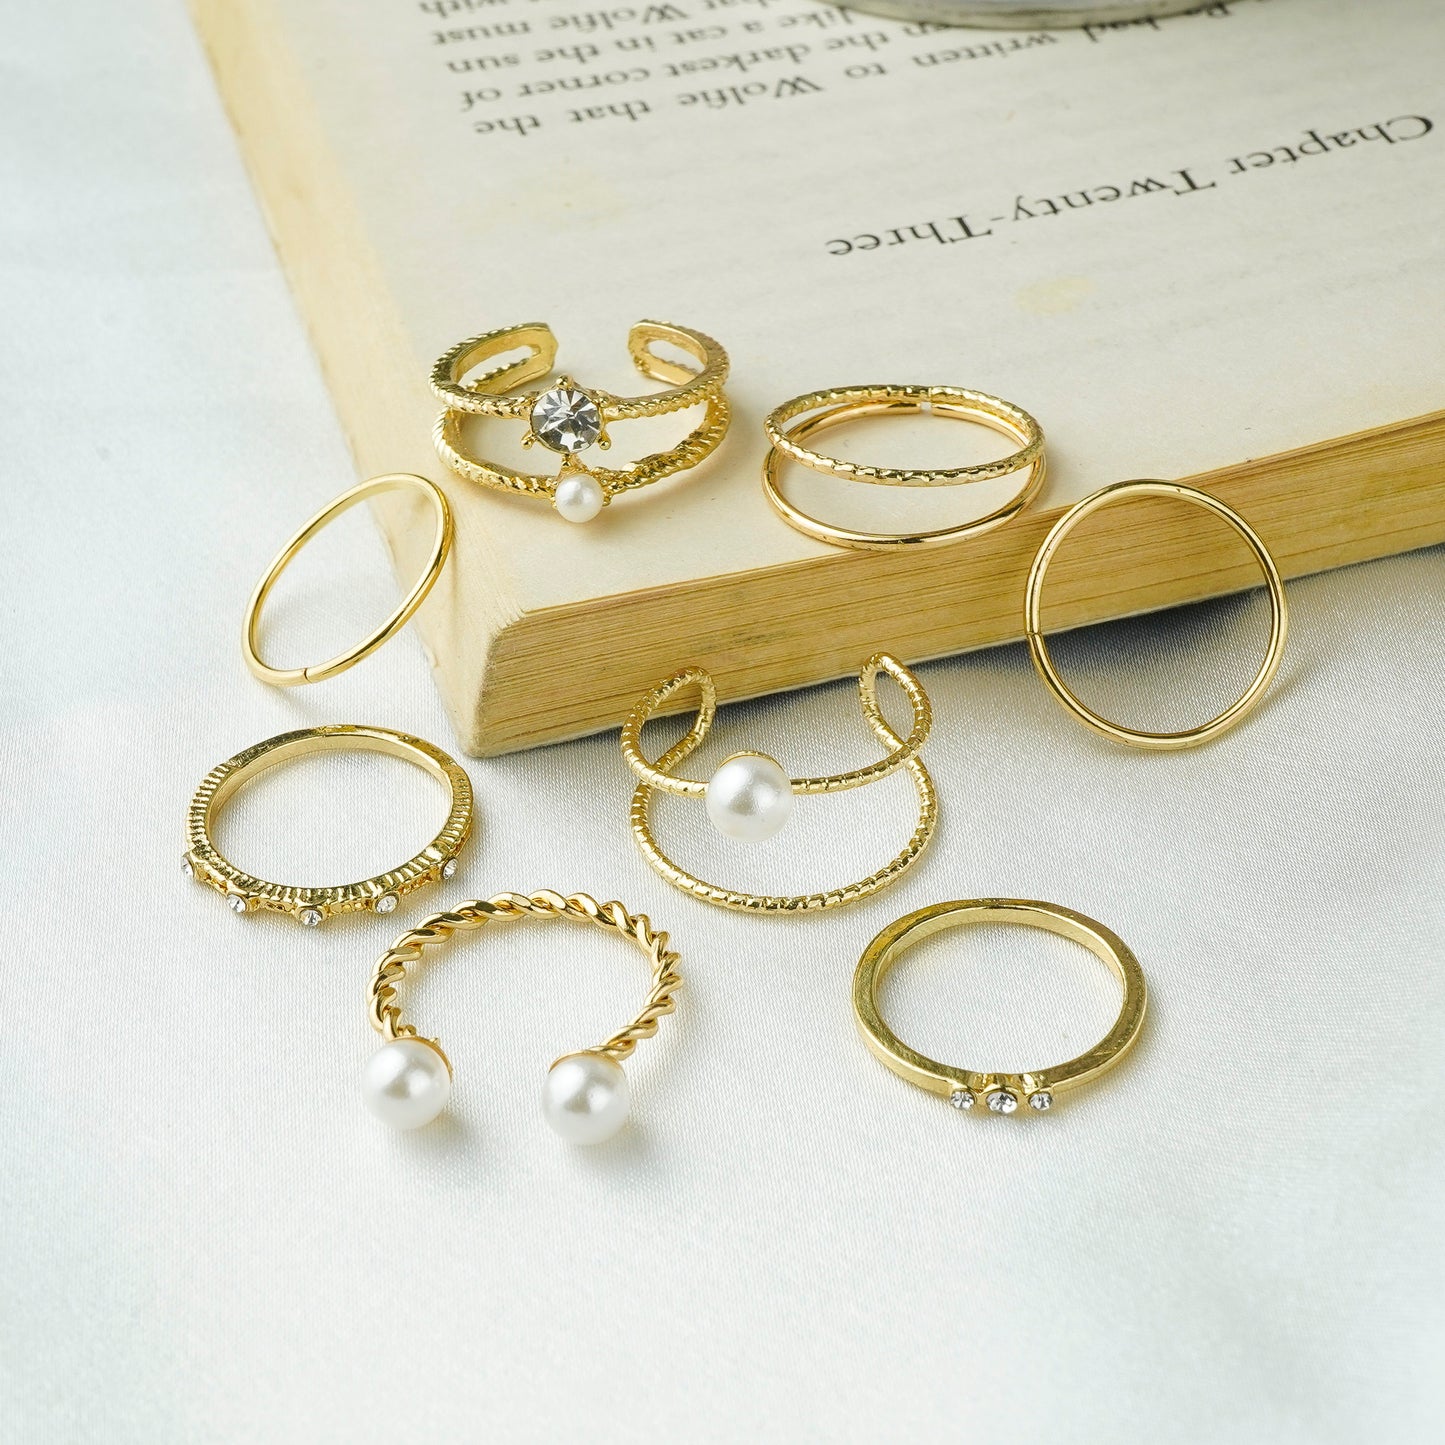 Trendy Set Ring For Fashionable Women(Code:R28)